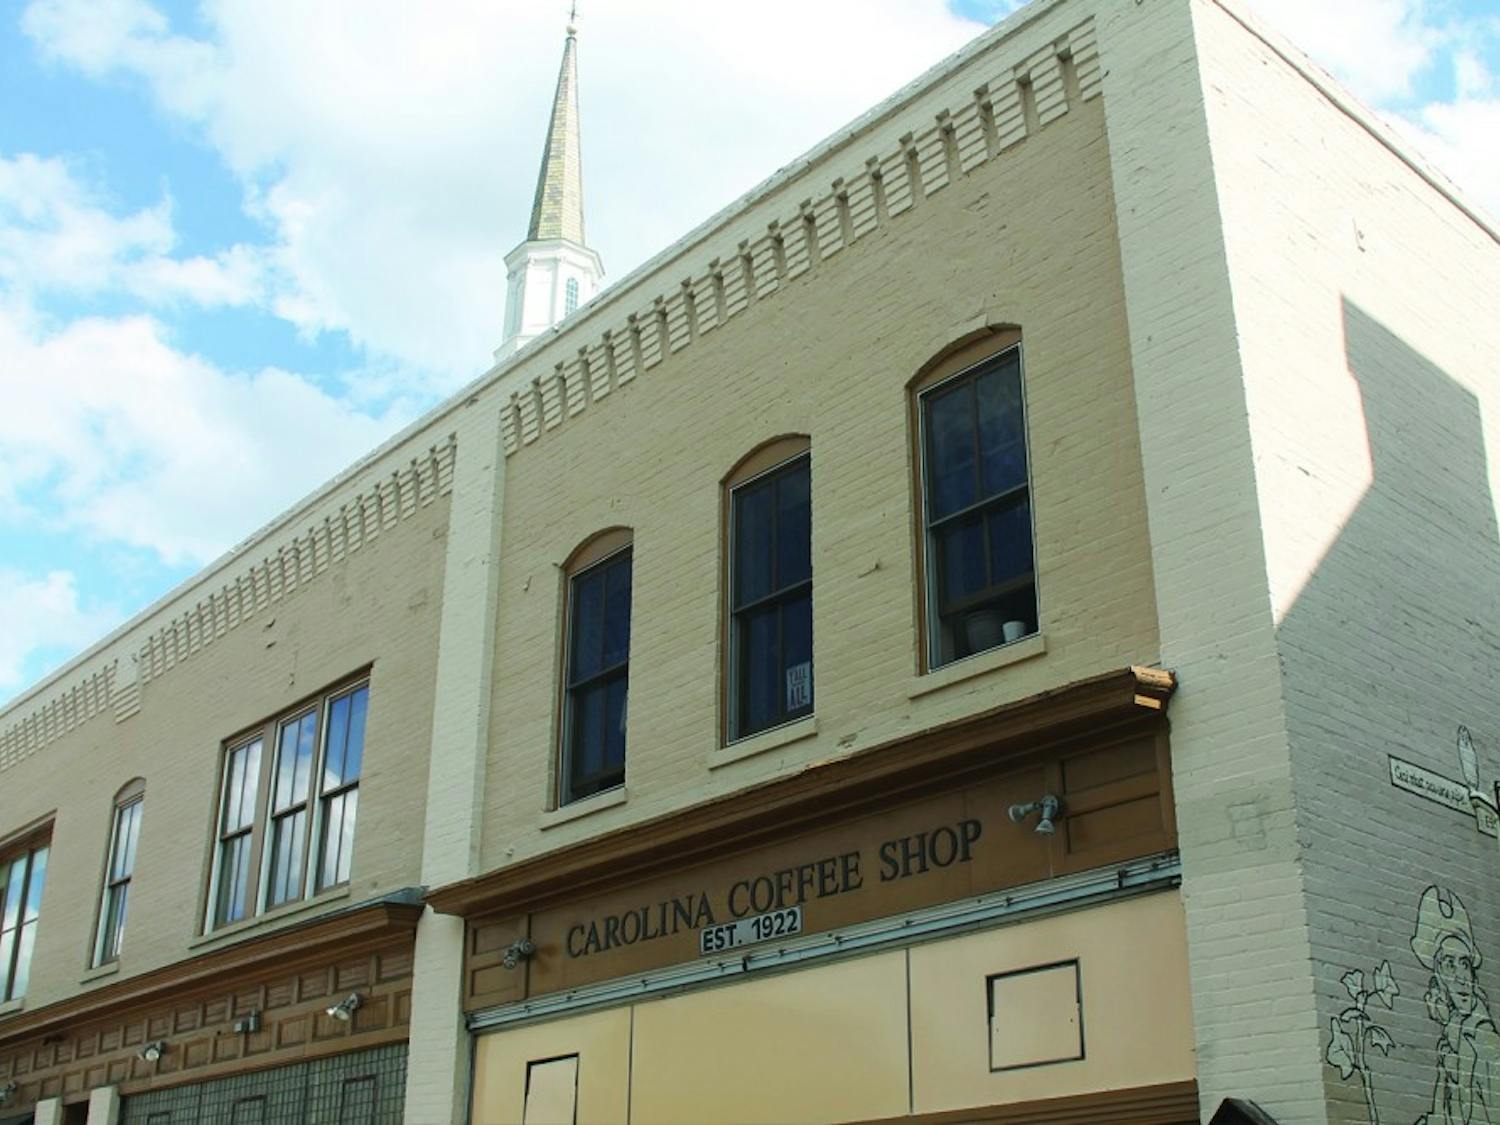 Carolina Coffee Shop has served Chapel Hill residents and students as the longest continuously operating restaurant in North Carolina since 1922. 

